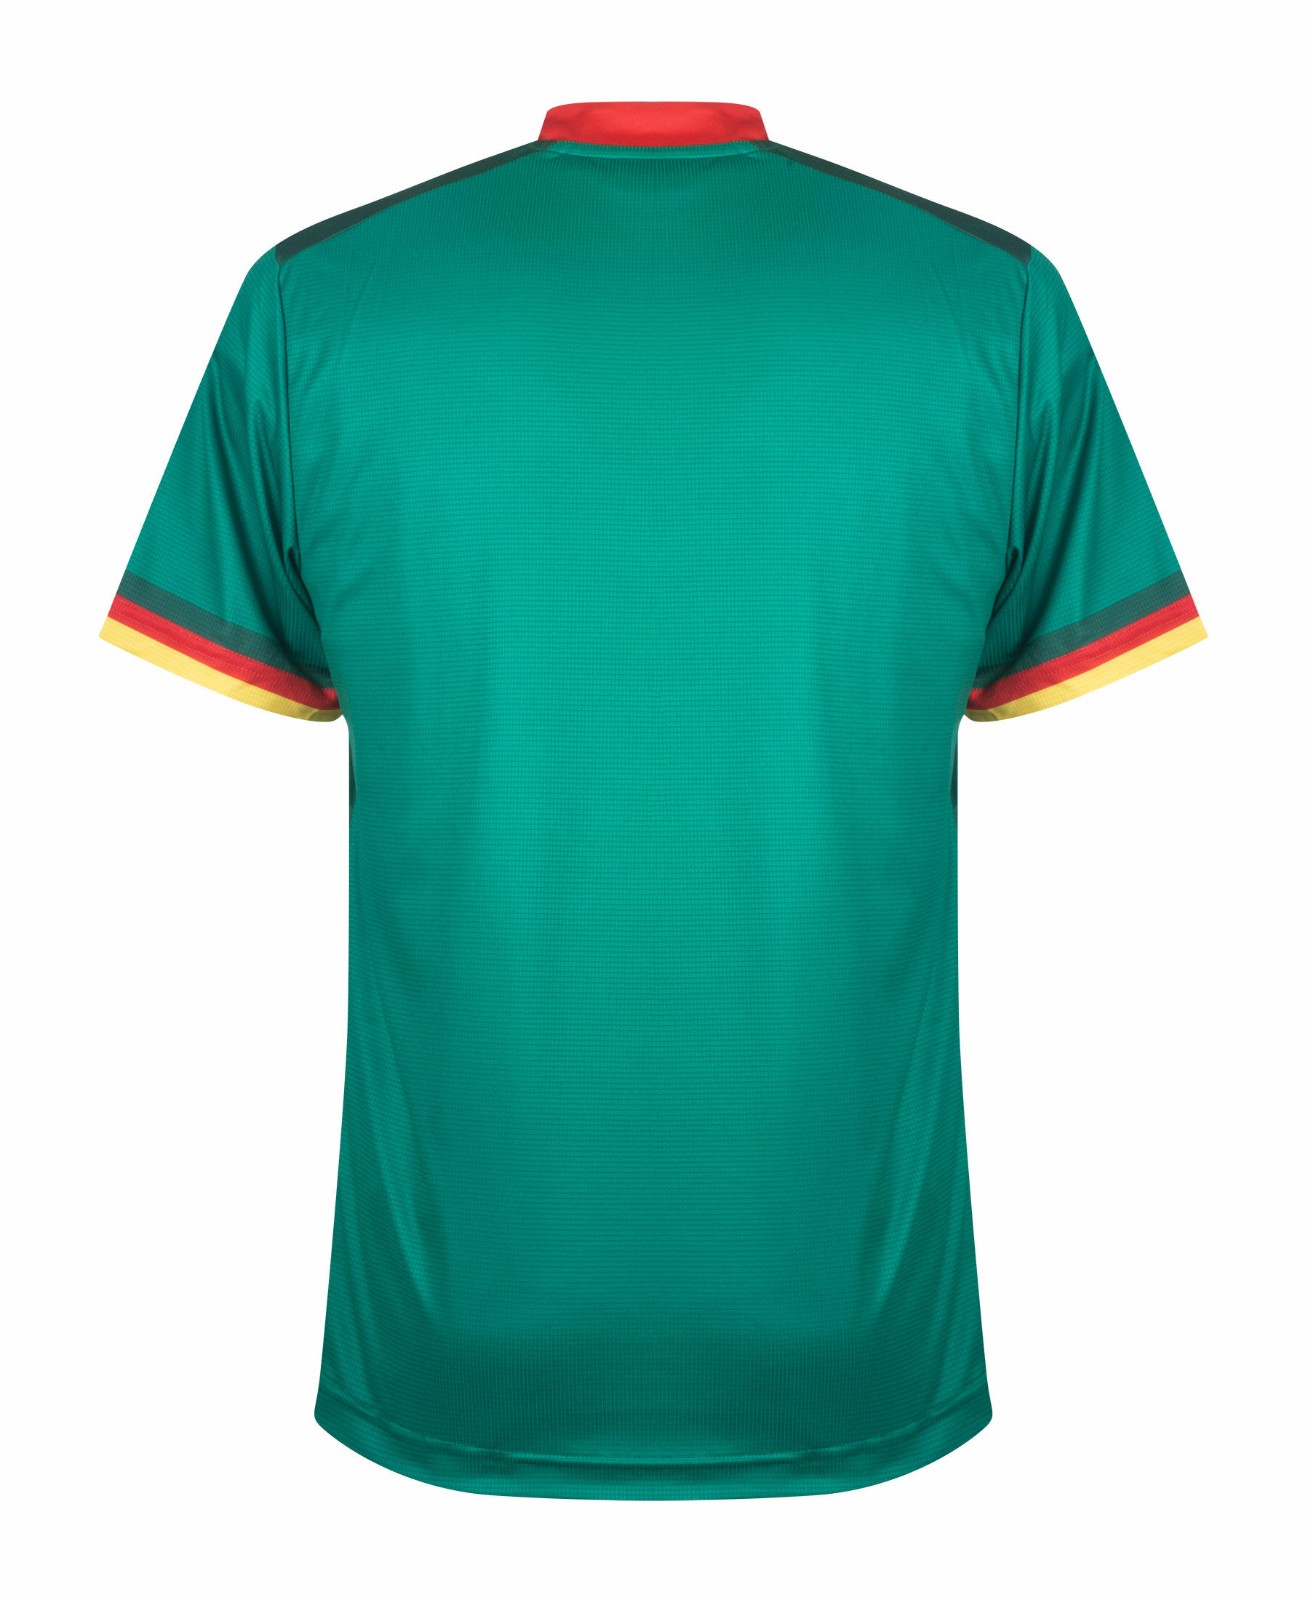 Cameroon 2022 World Cup Replica Home Soccer Jersey